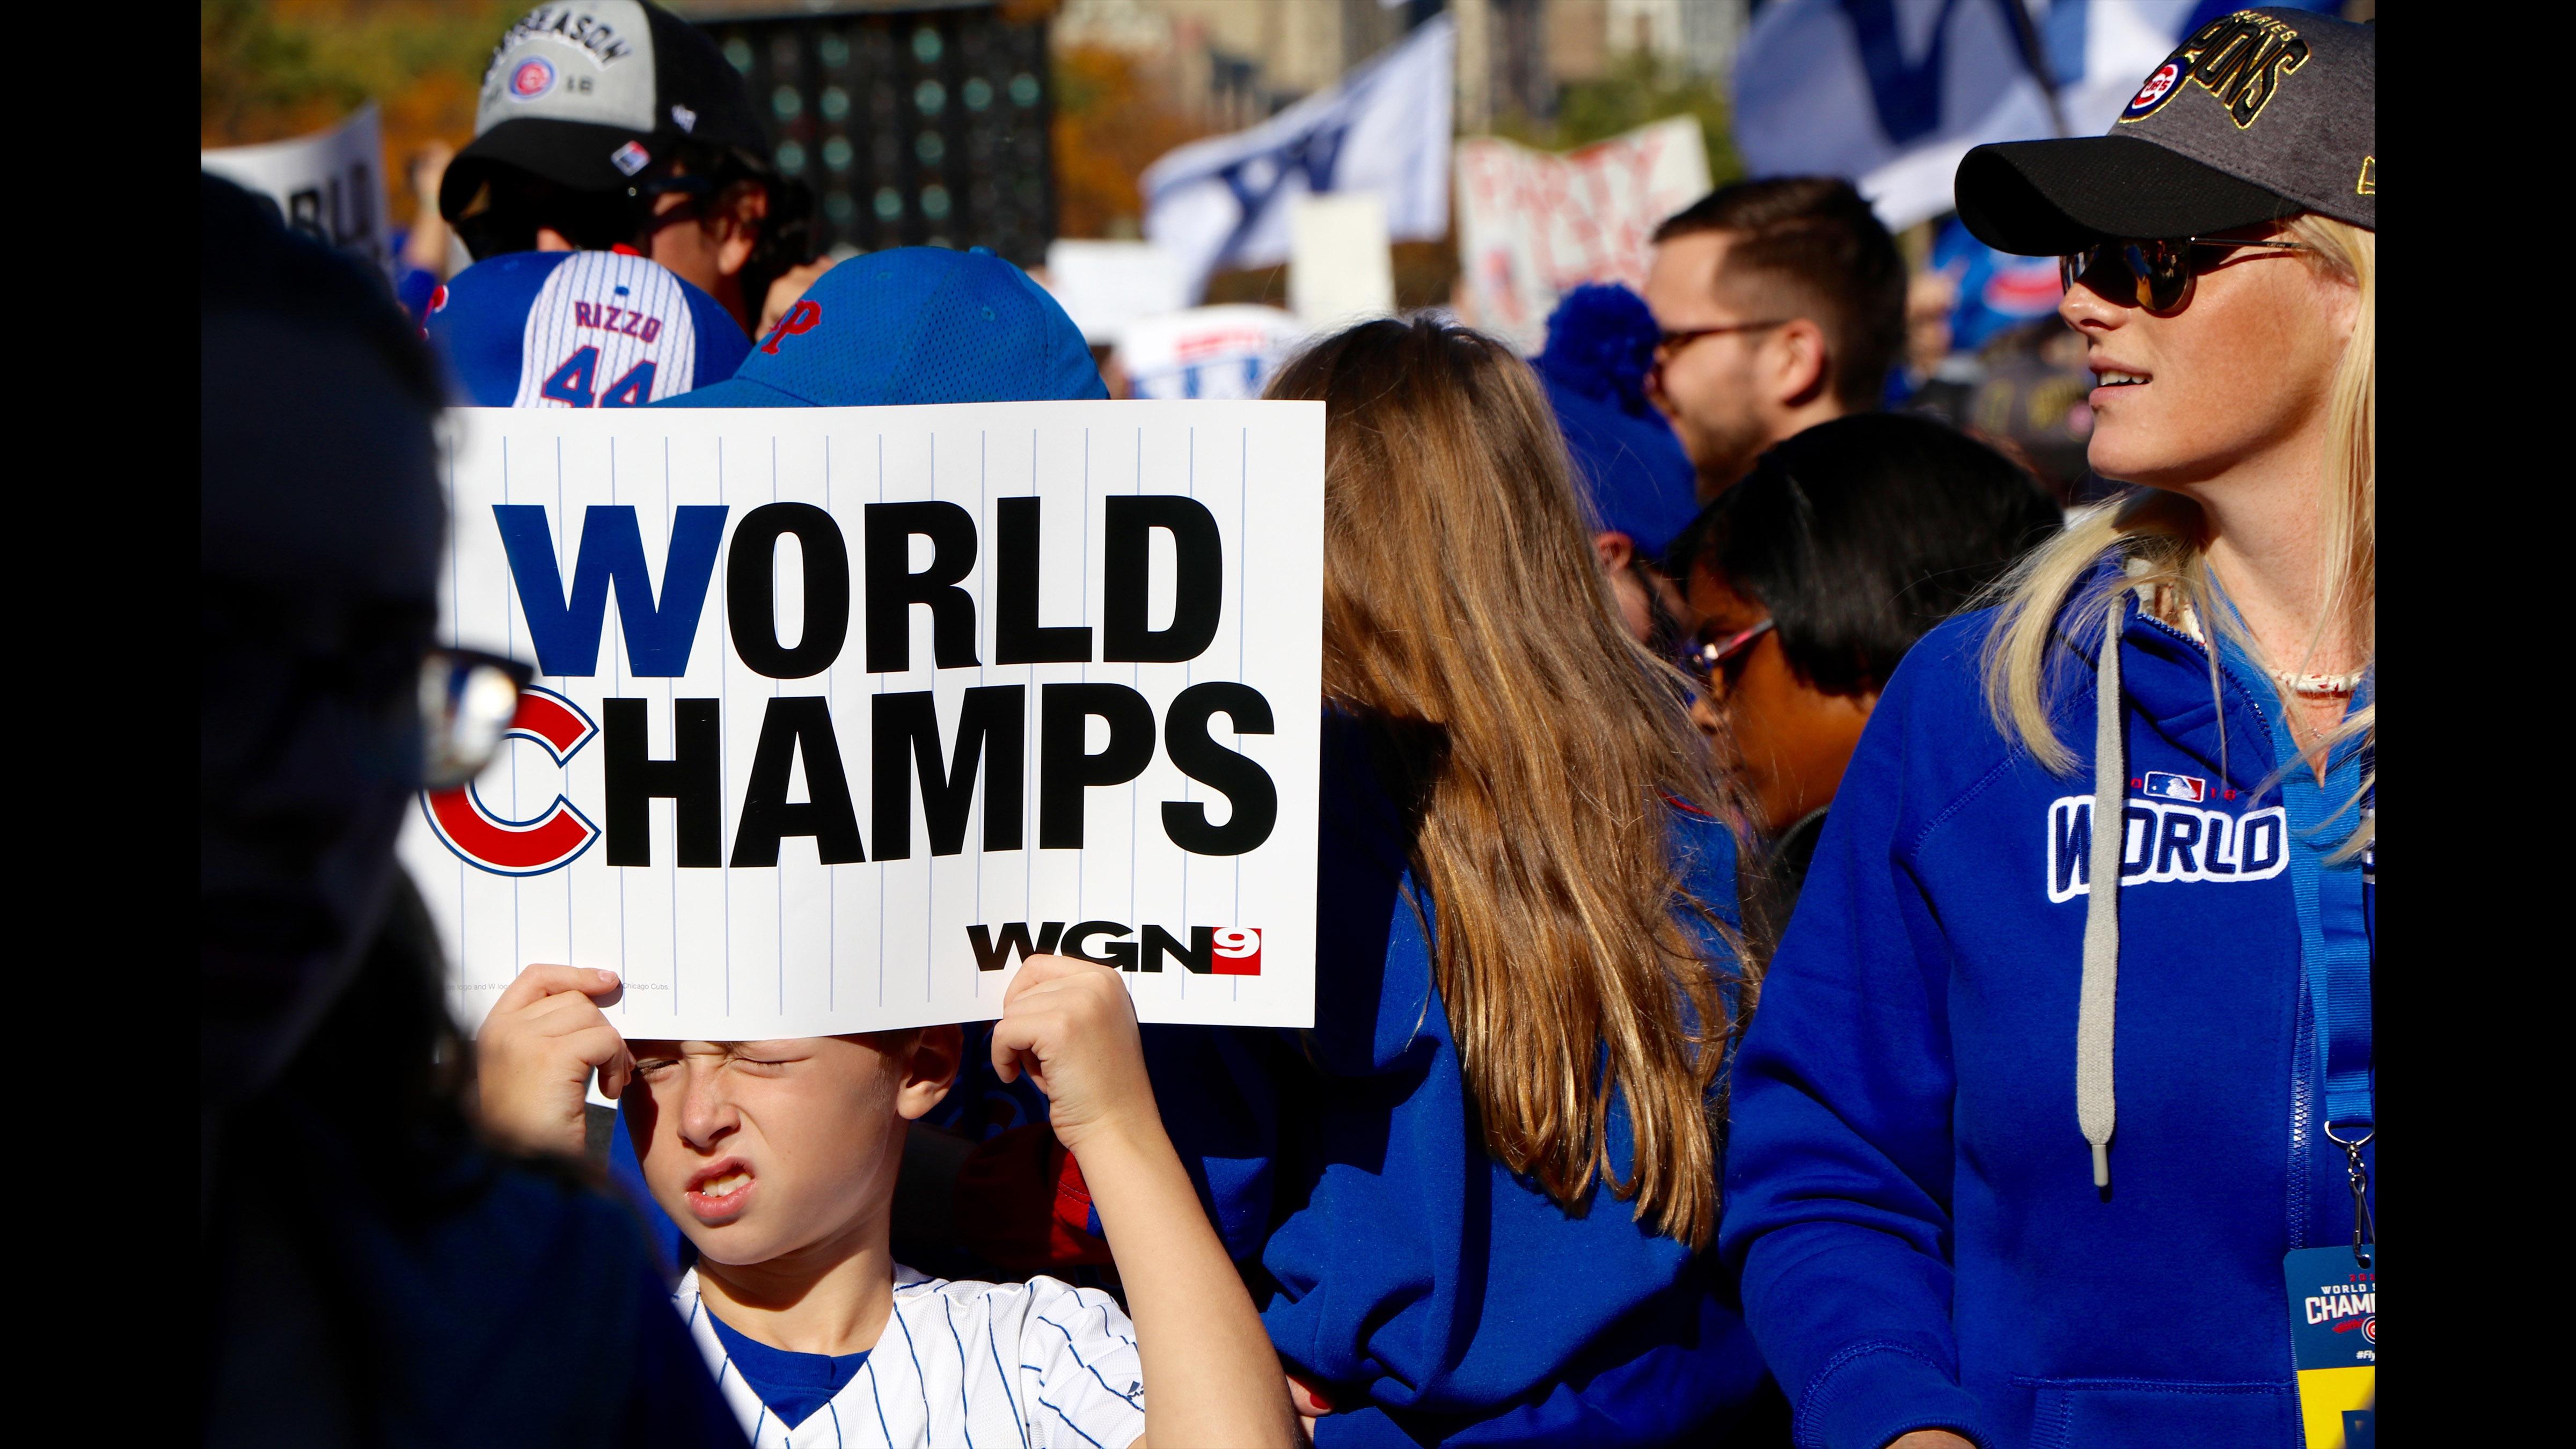 Chicago Cubs 2016 World Series Champions Parade Trophy 